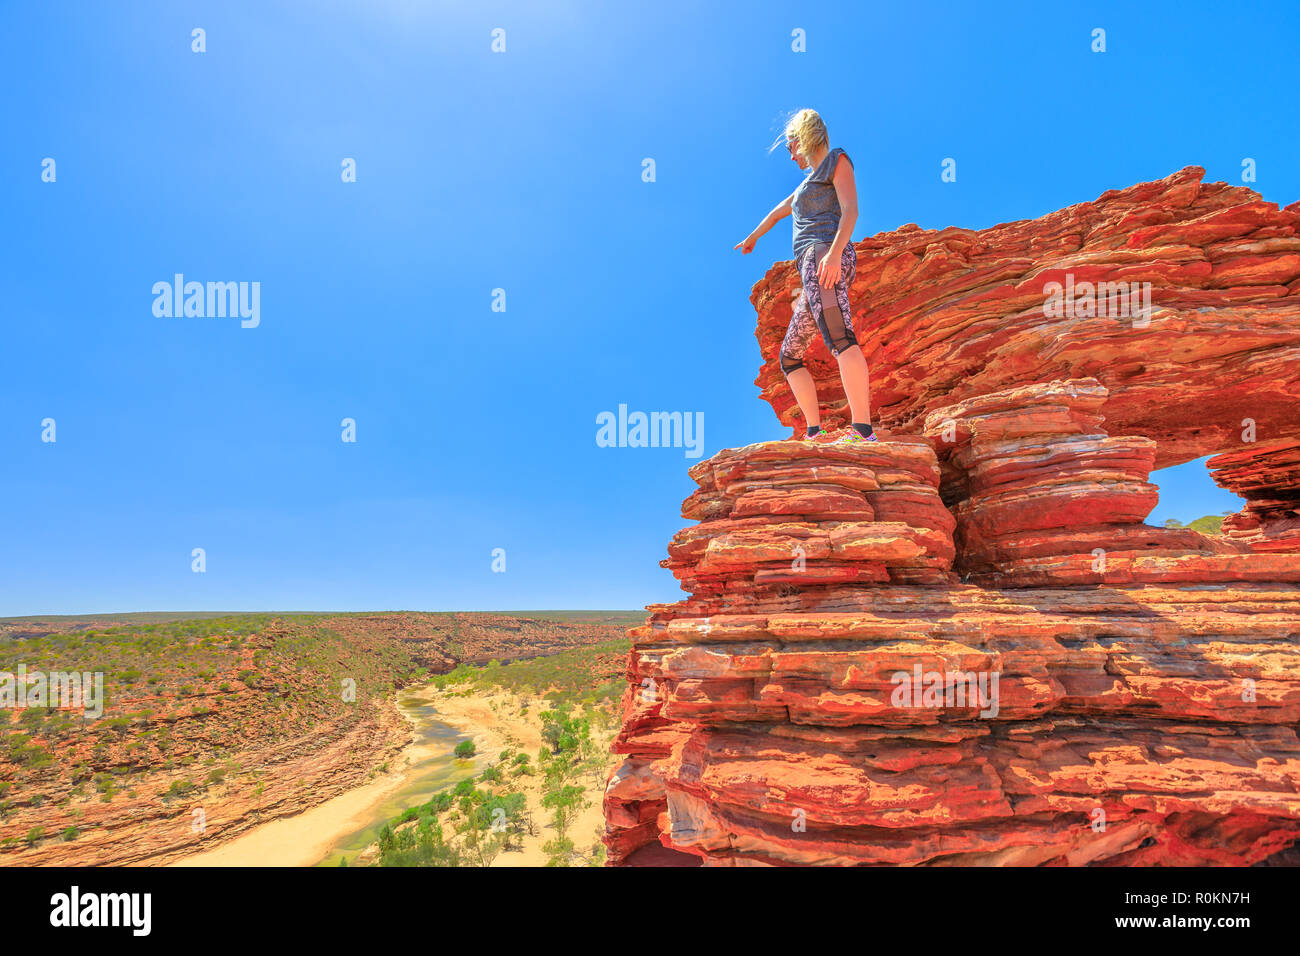 Backpaker woman over iconic Nature's Window, with rocks rippled with red and white banded, pointing Murchison River in Kalbarri National Park, Western Australia. Australia, outback travel. Copy space. Stock Photo